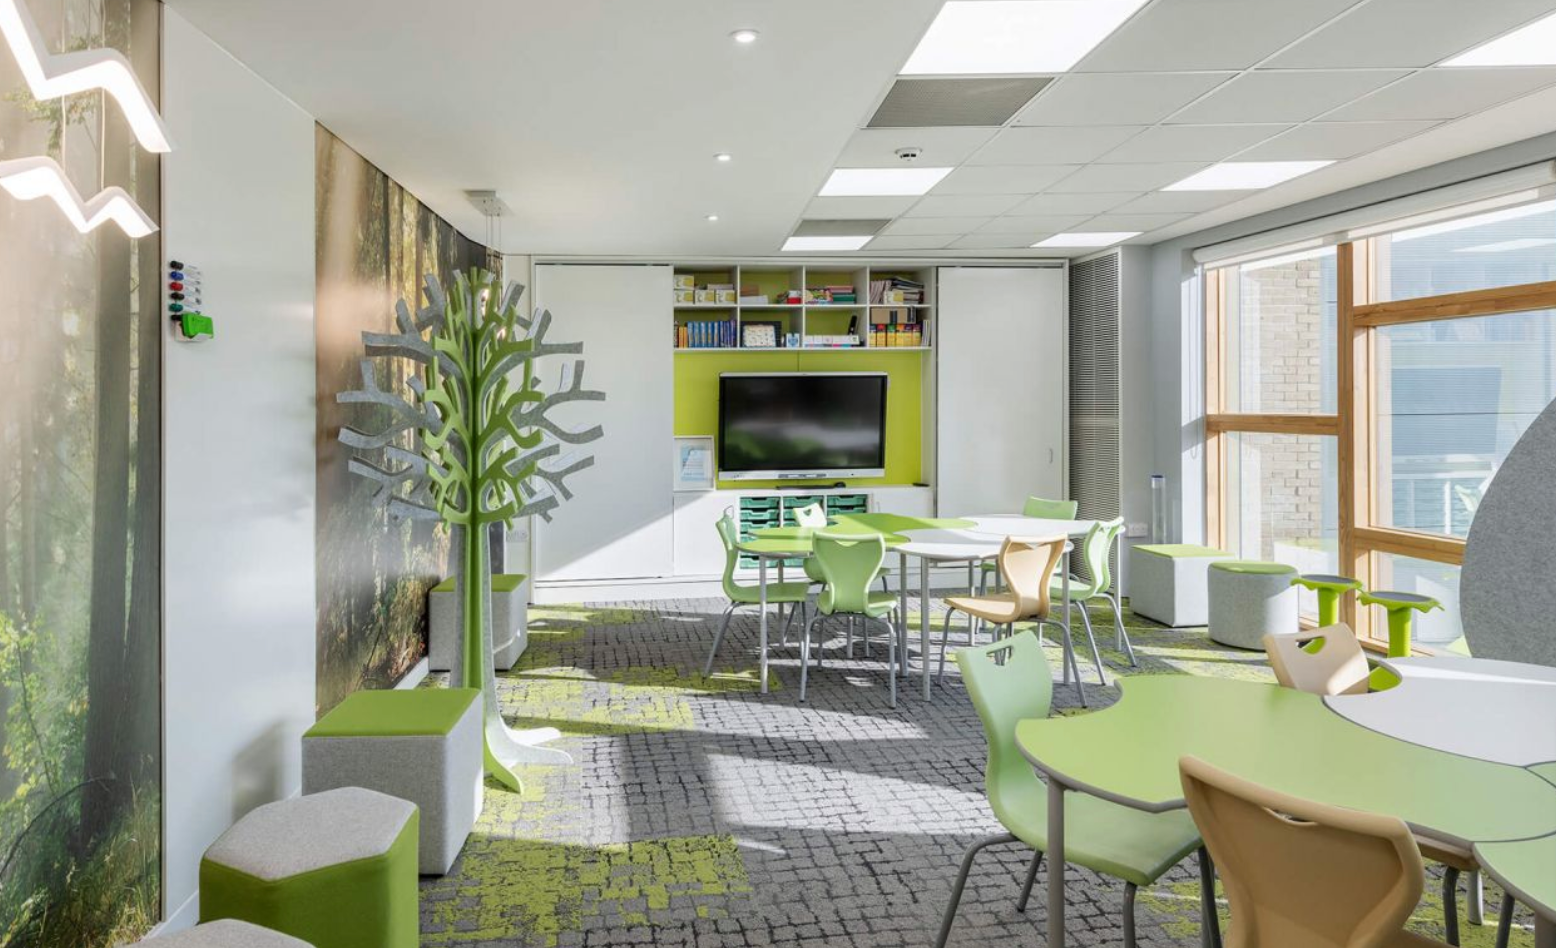 How School Furniture Shapes the Learning Experience